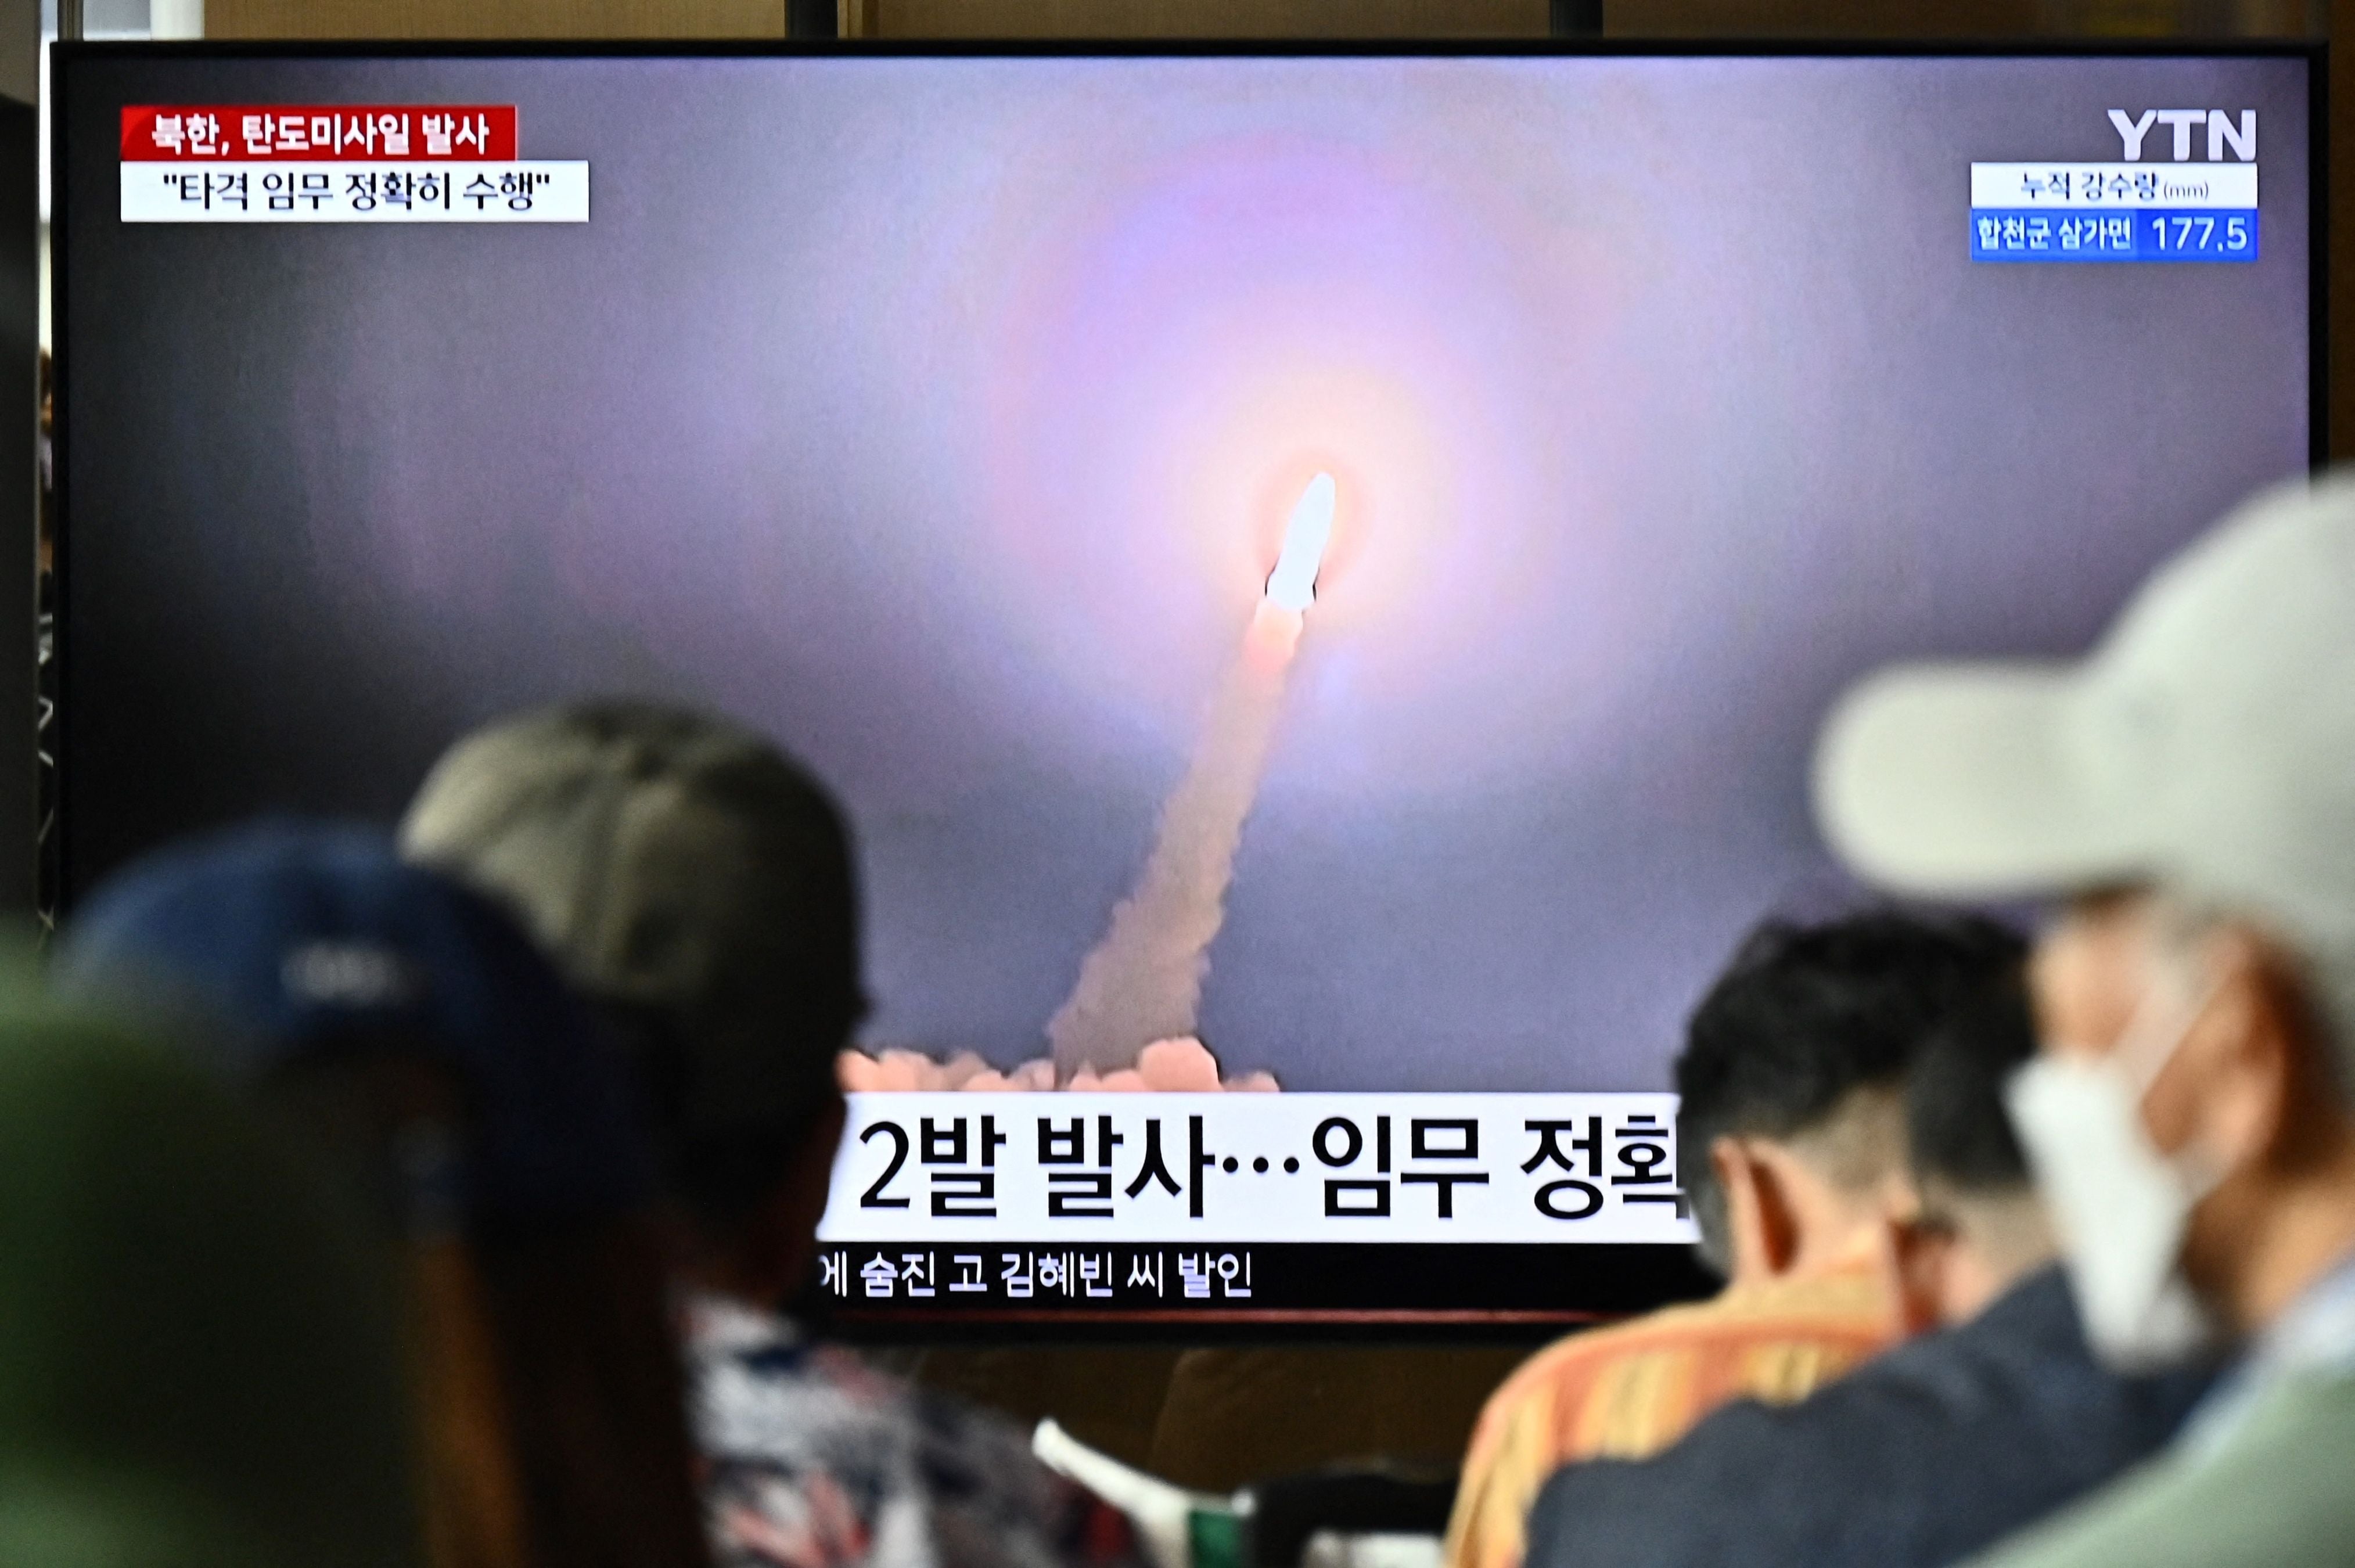 People watch a television showing a news broadcast with a photo of a North Korean missile test on 31 August